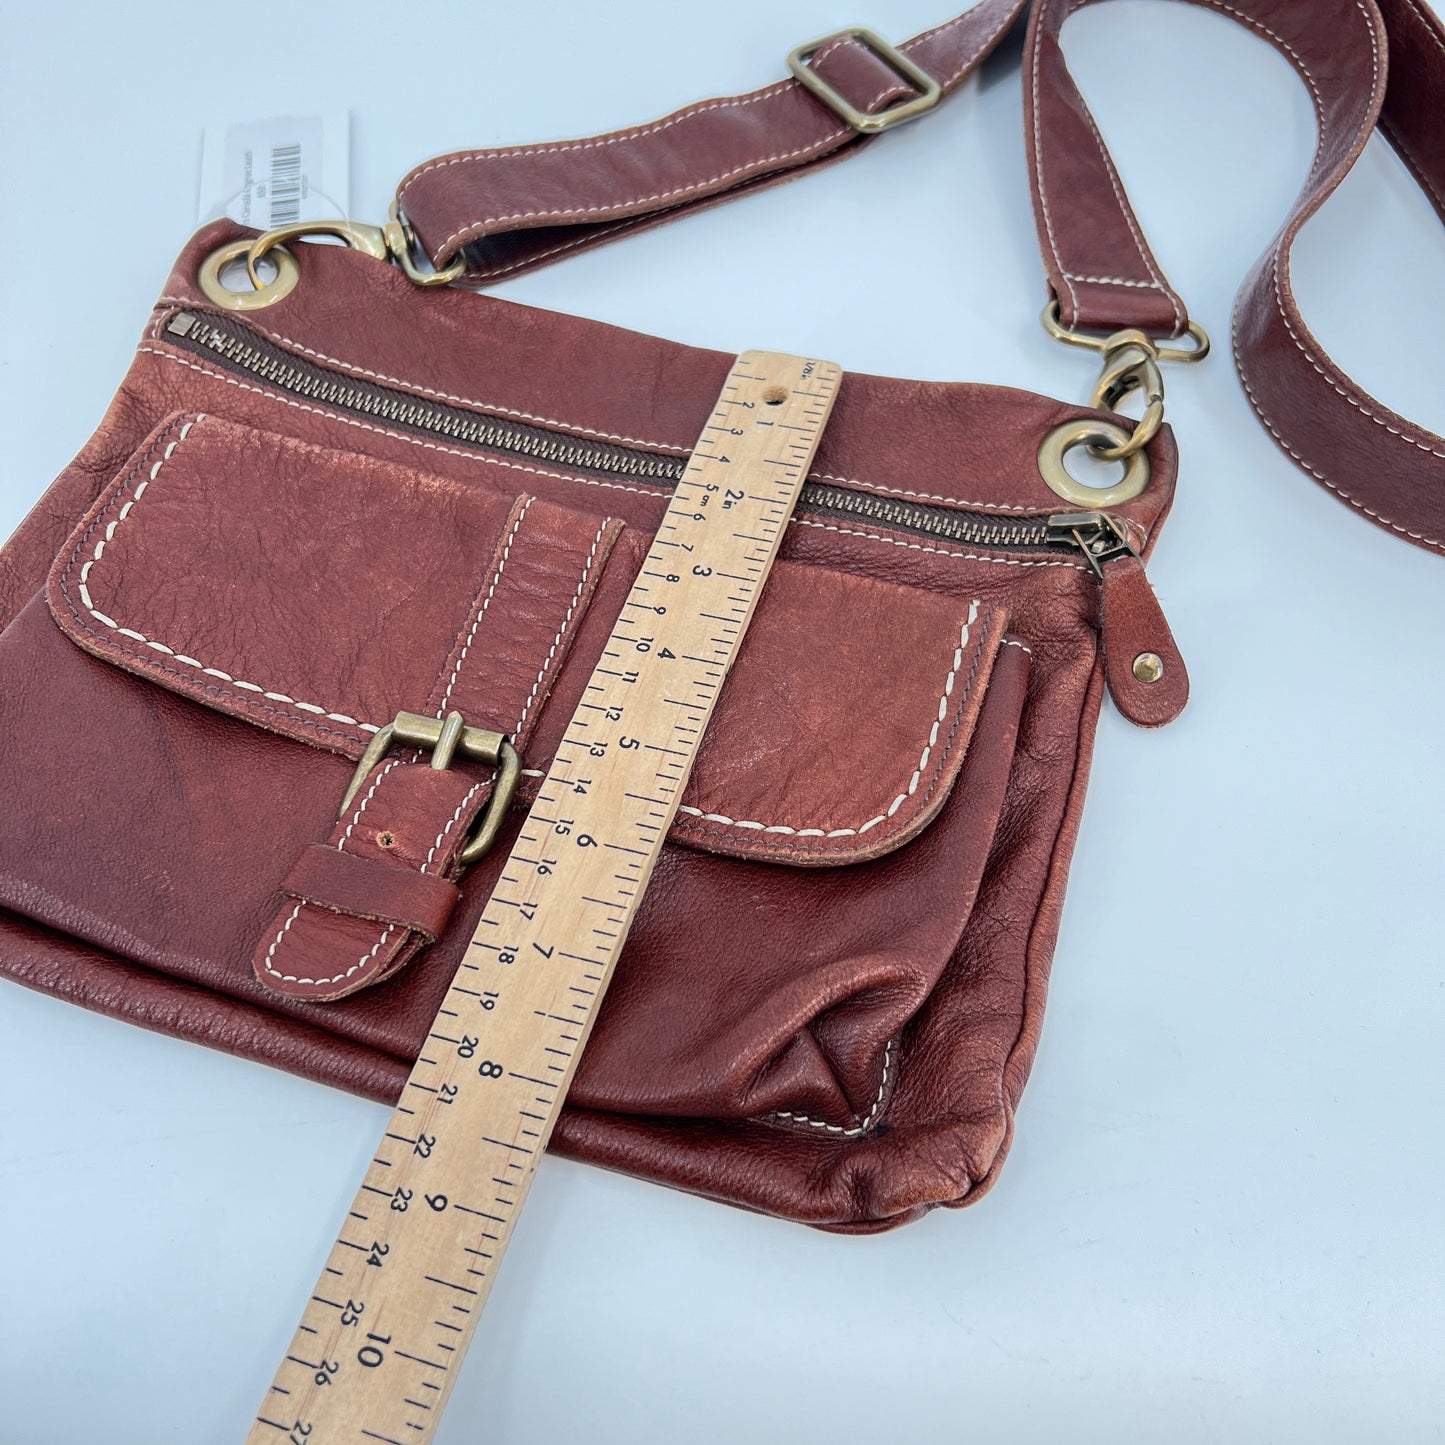 SOLD. Roots Canada Cognac Leather Bag